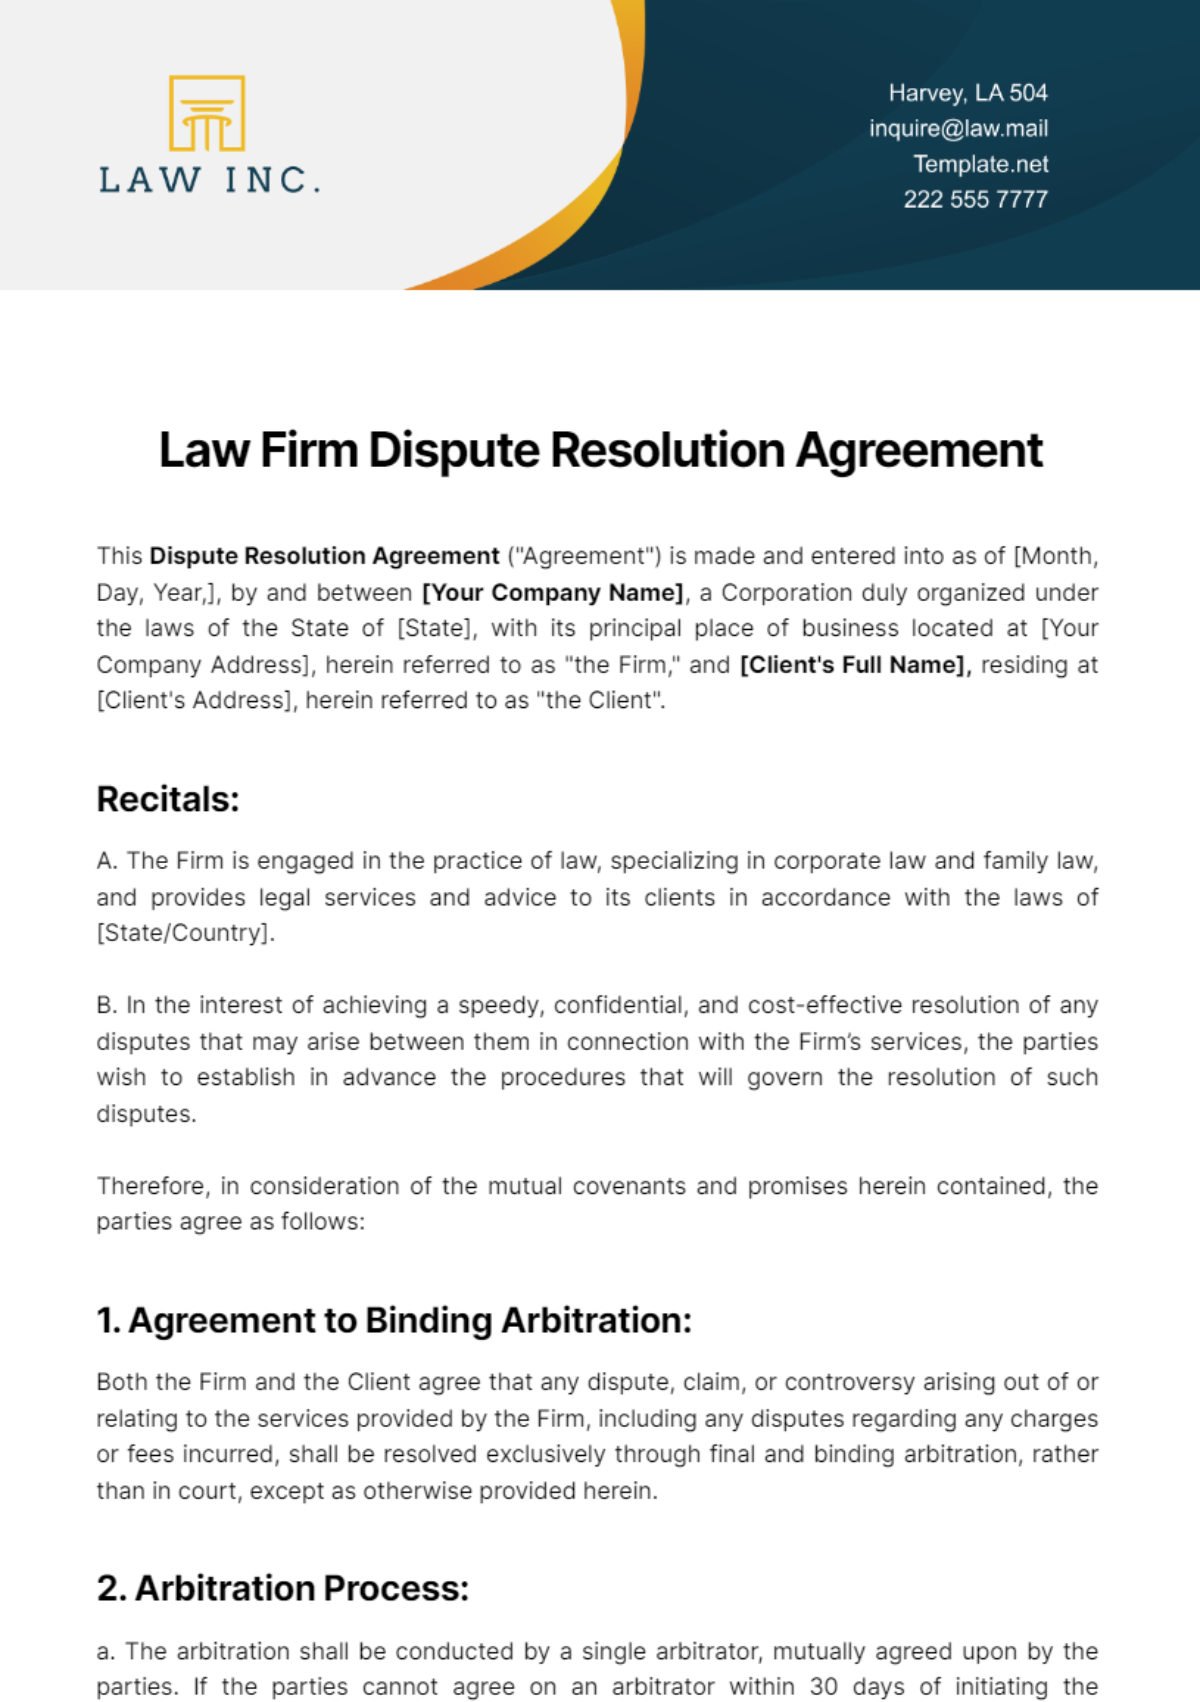 Law Firm Dispute Resolution Agreement Template